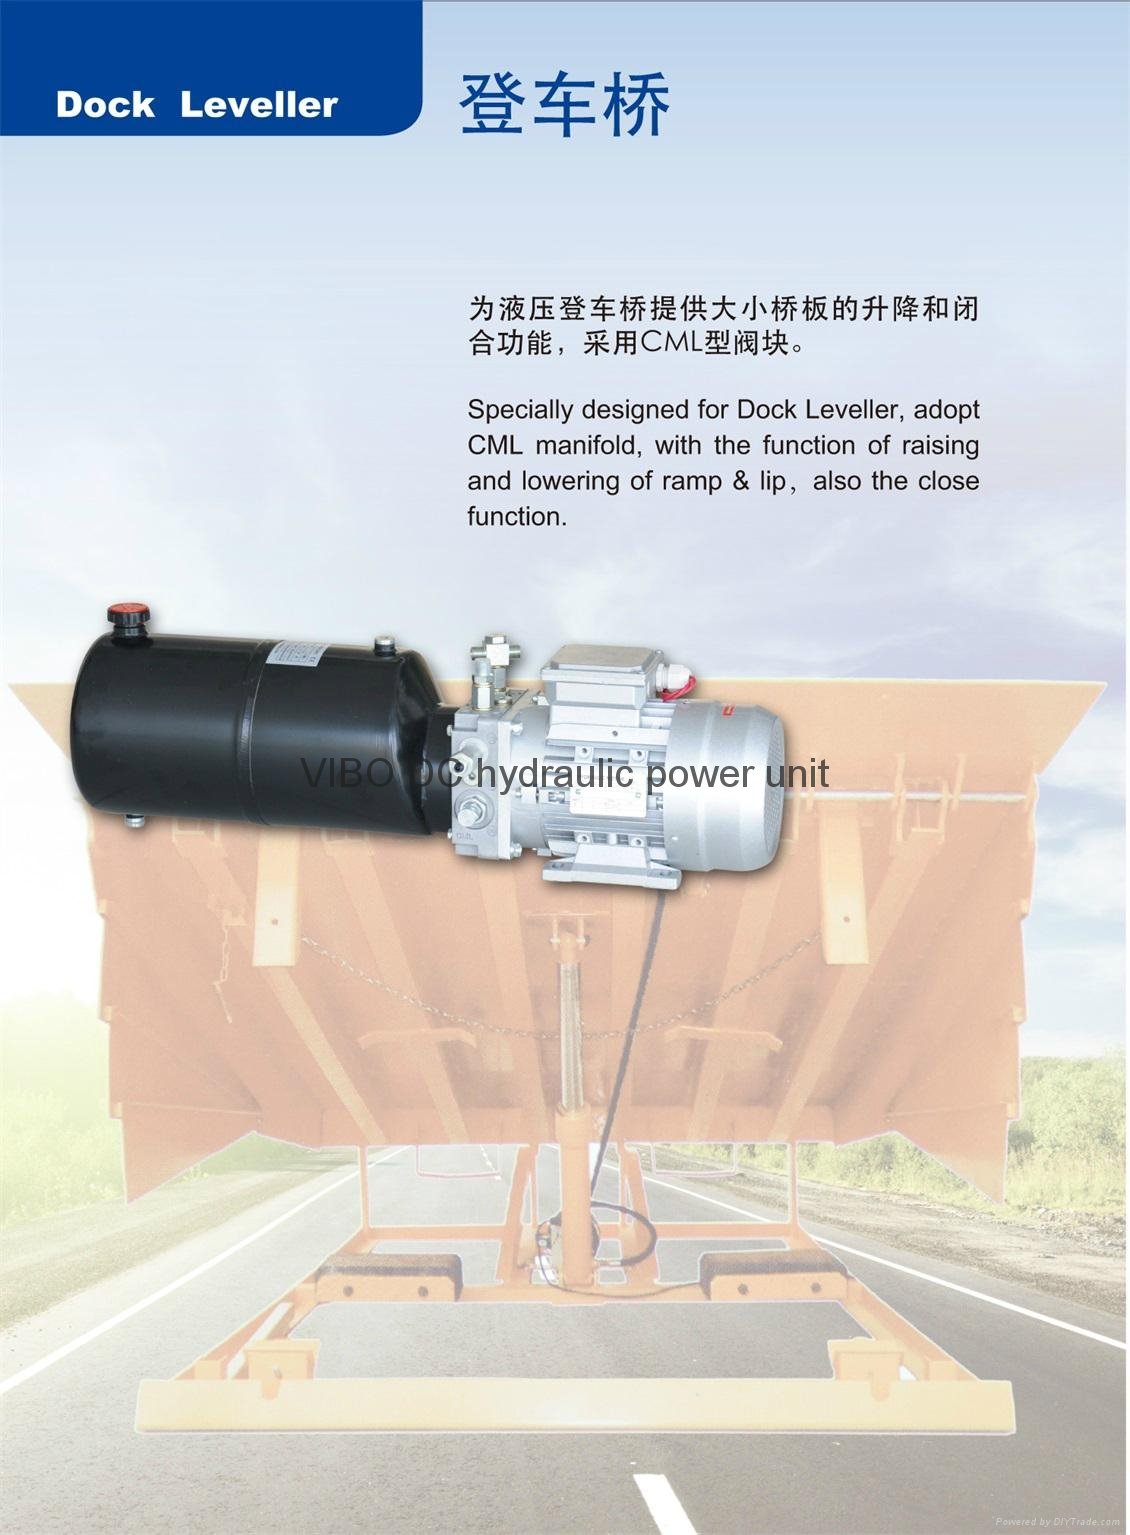 Hydraulic power unit for Dock Leveller